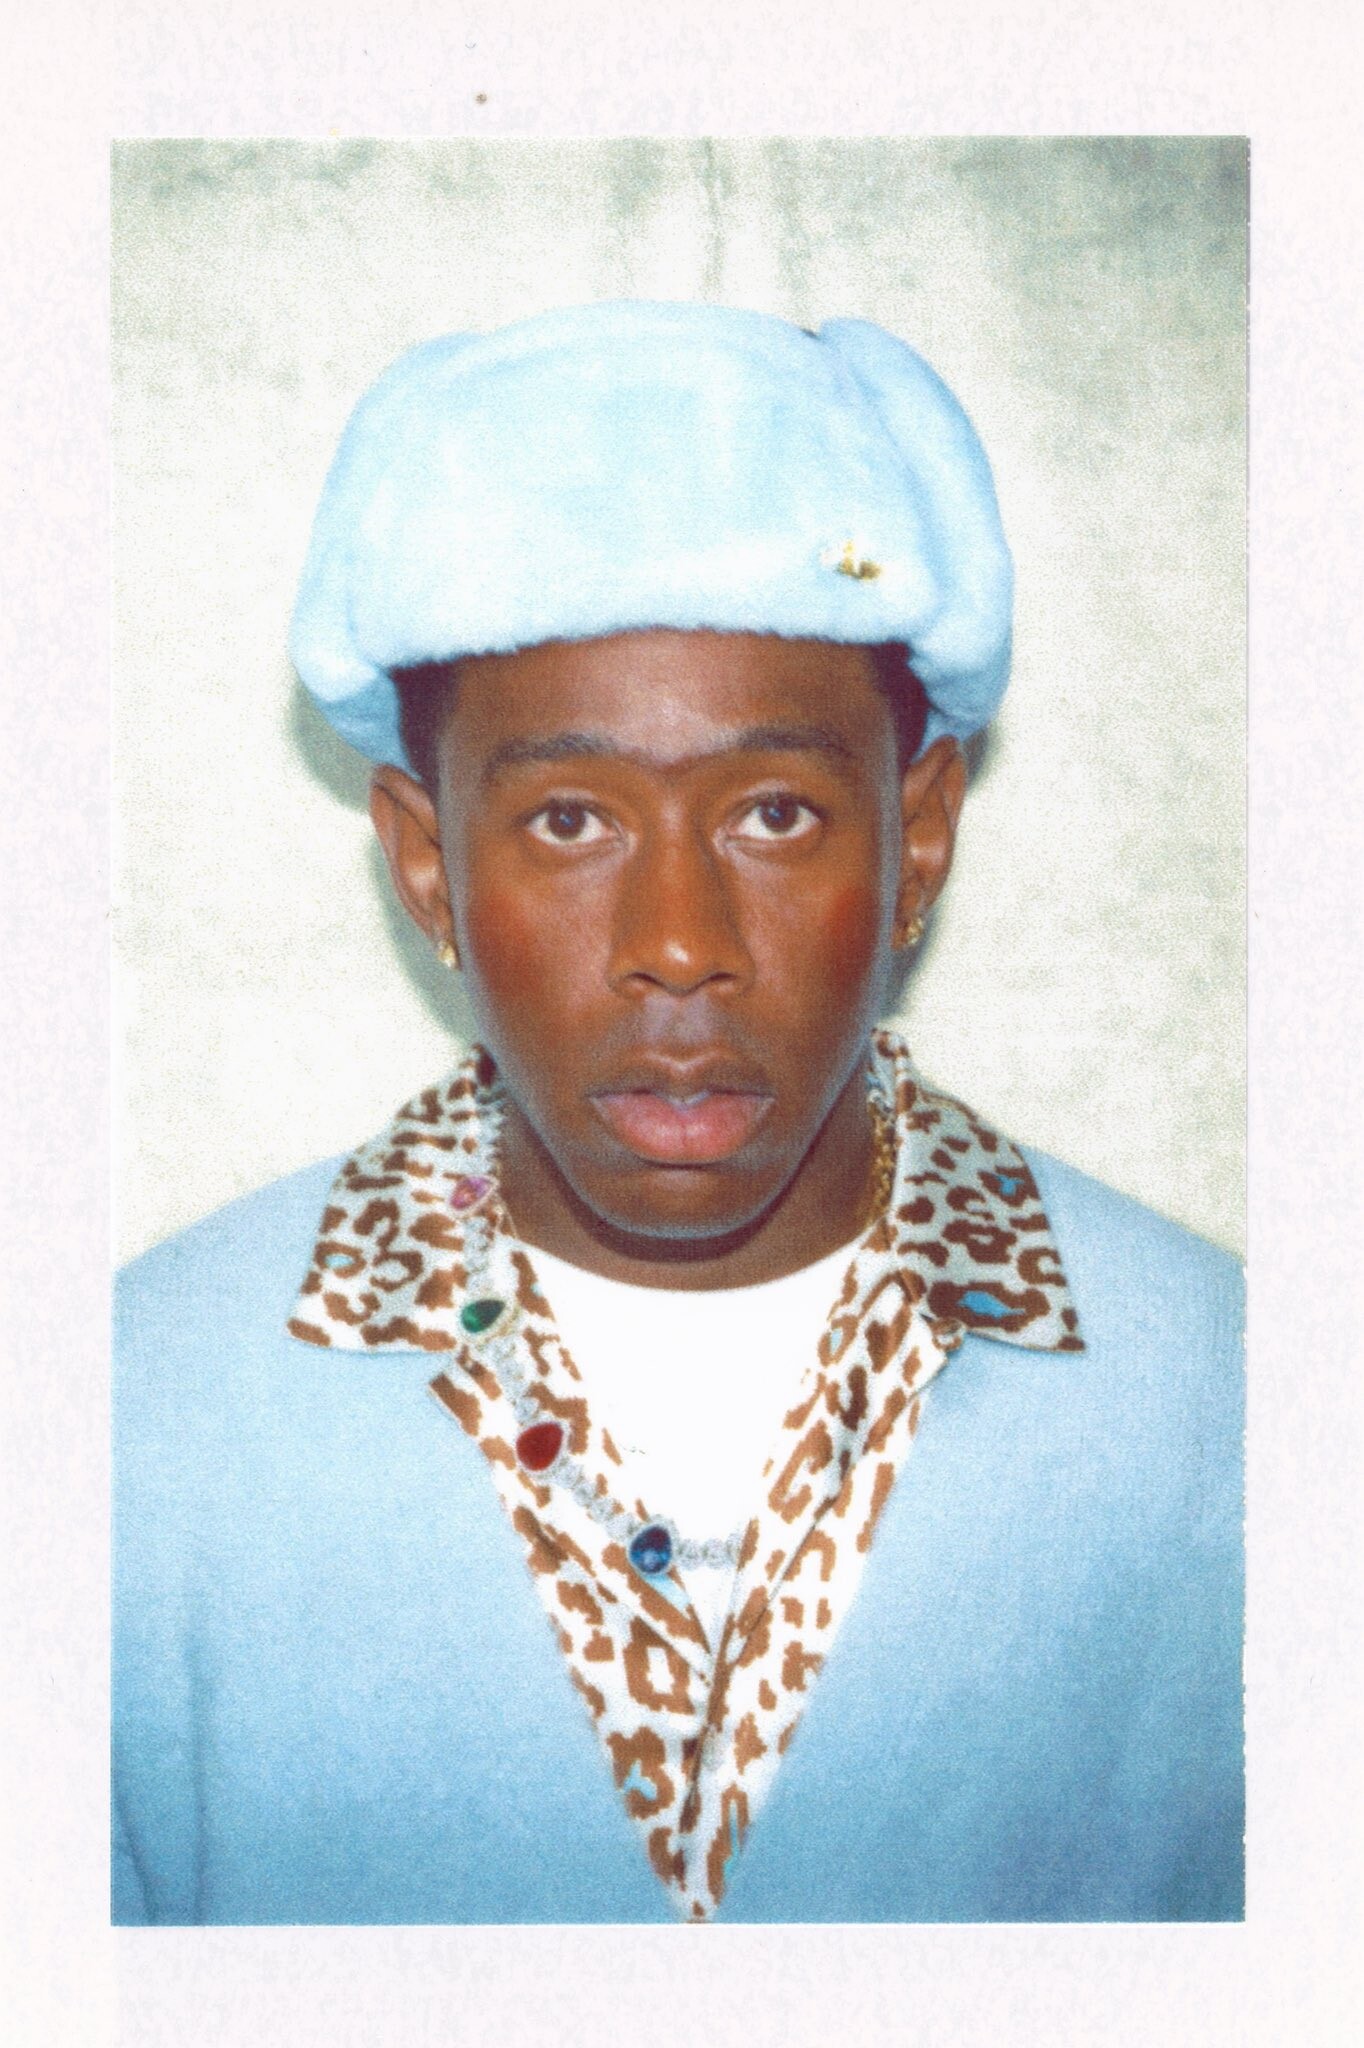 ArtStation - Tyler, the Creator Evolution (CALL ME IF YOU GET LOST)